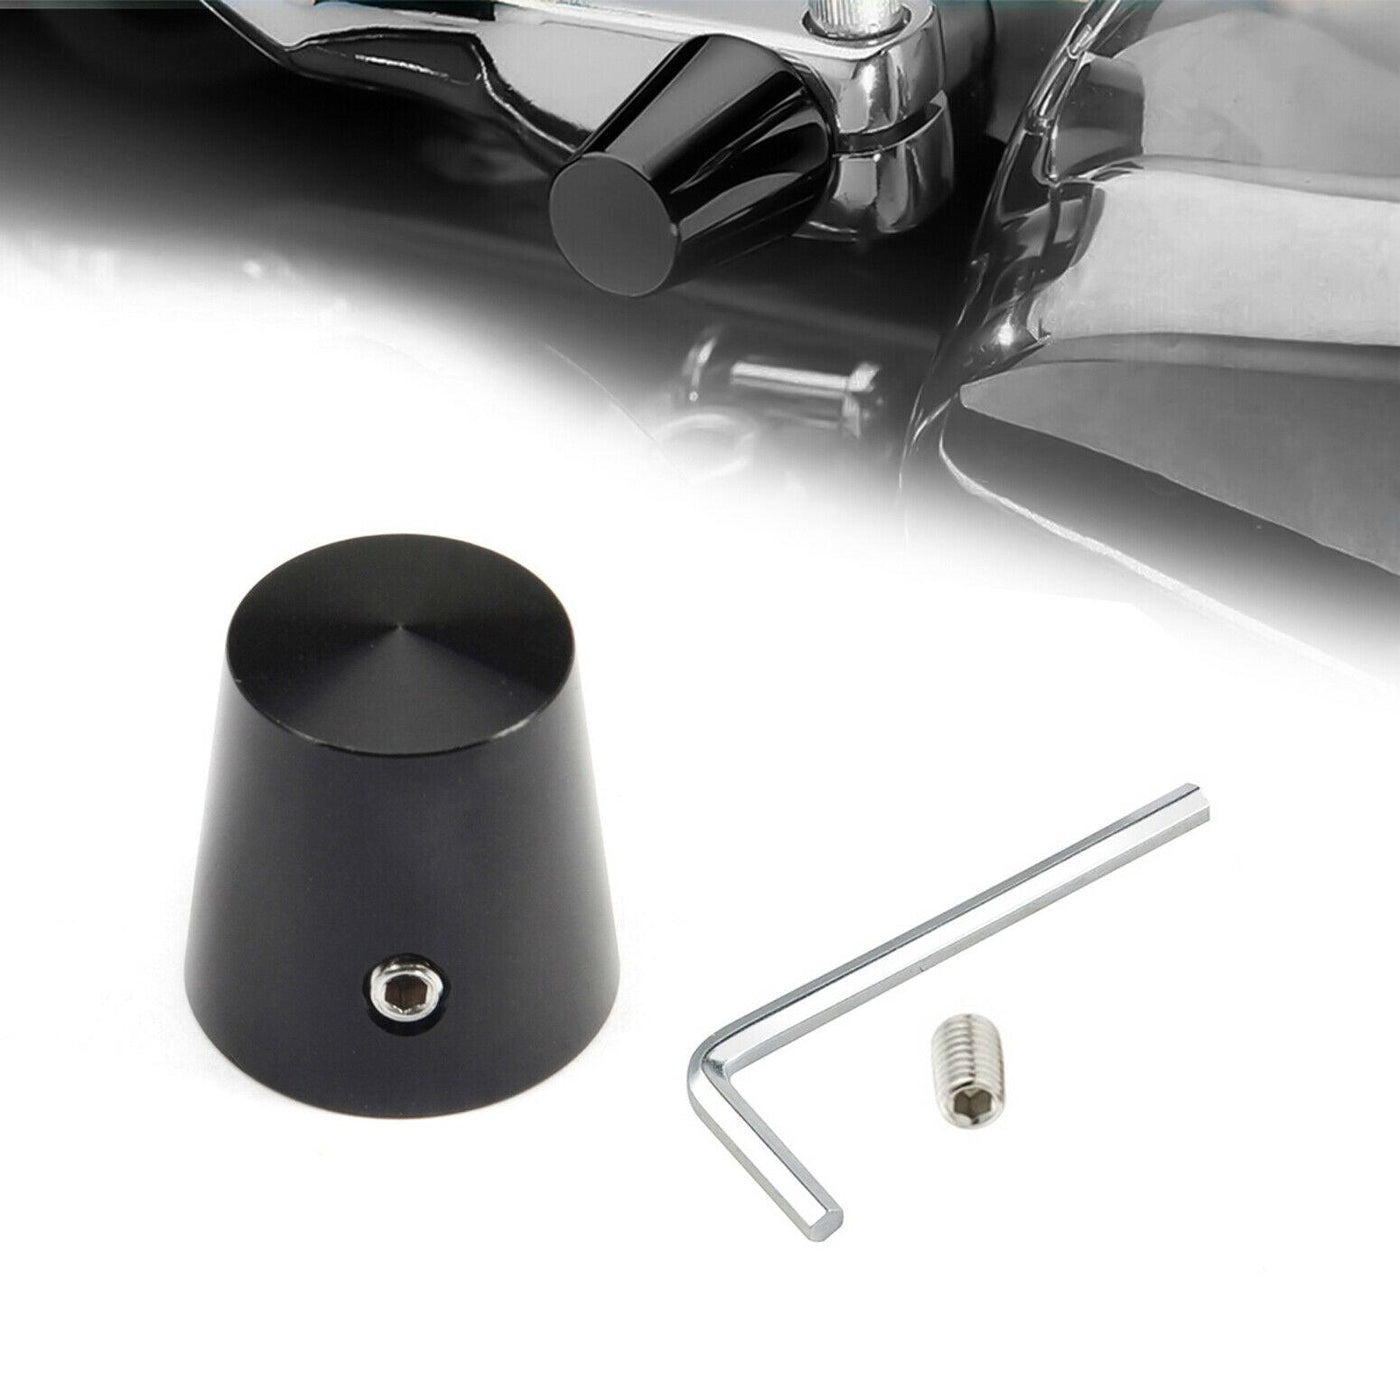 Aluminium Heel Shift Eliminator Fit for Harley Touring Tour Street Glide 80-20 - Moto Life Products